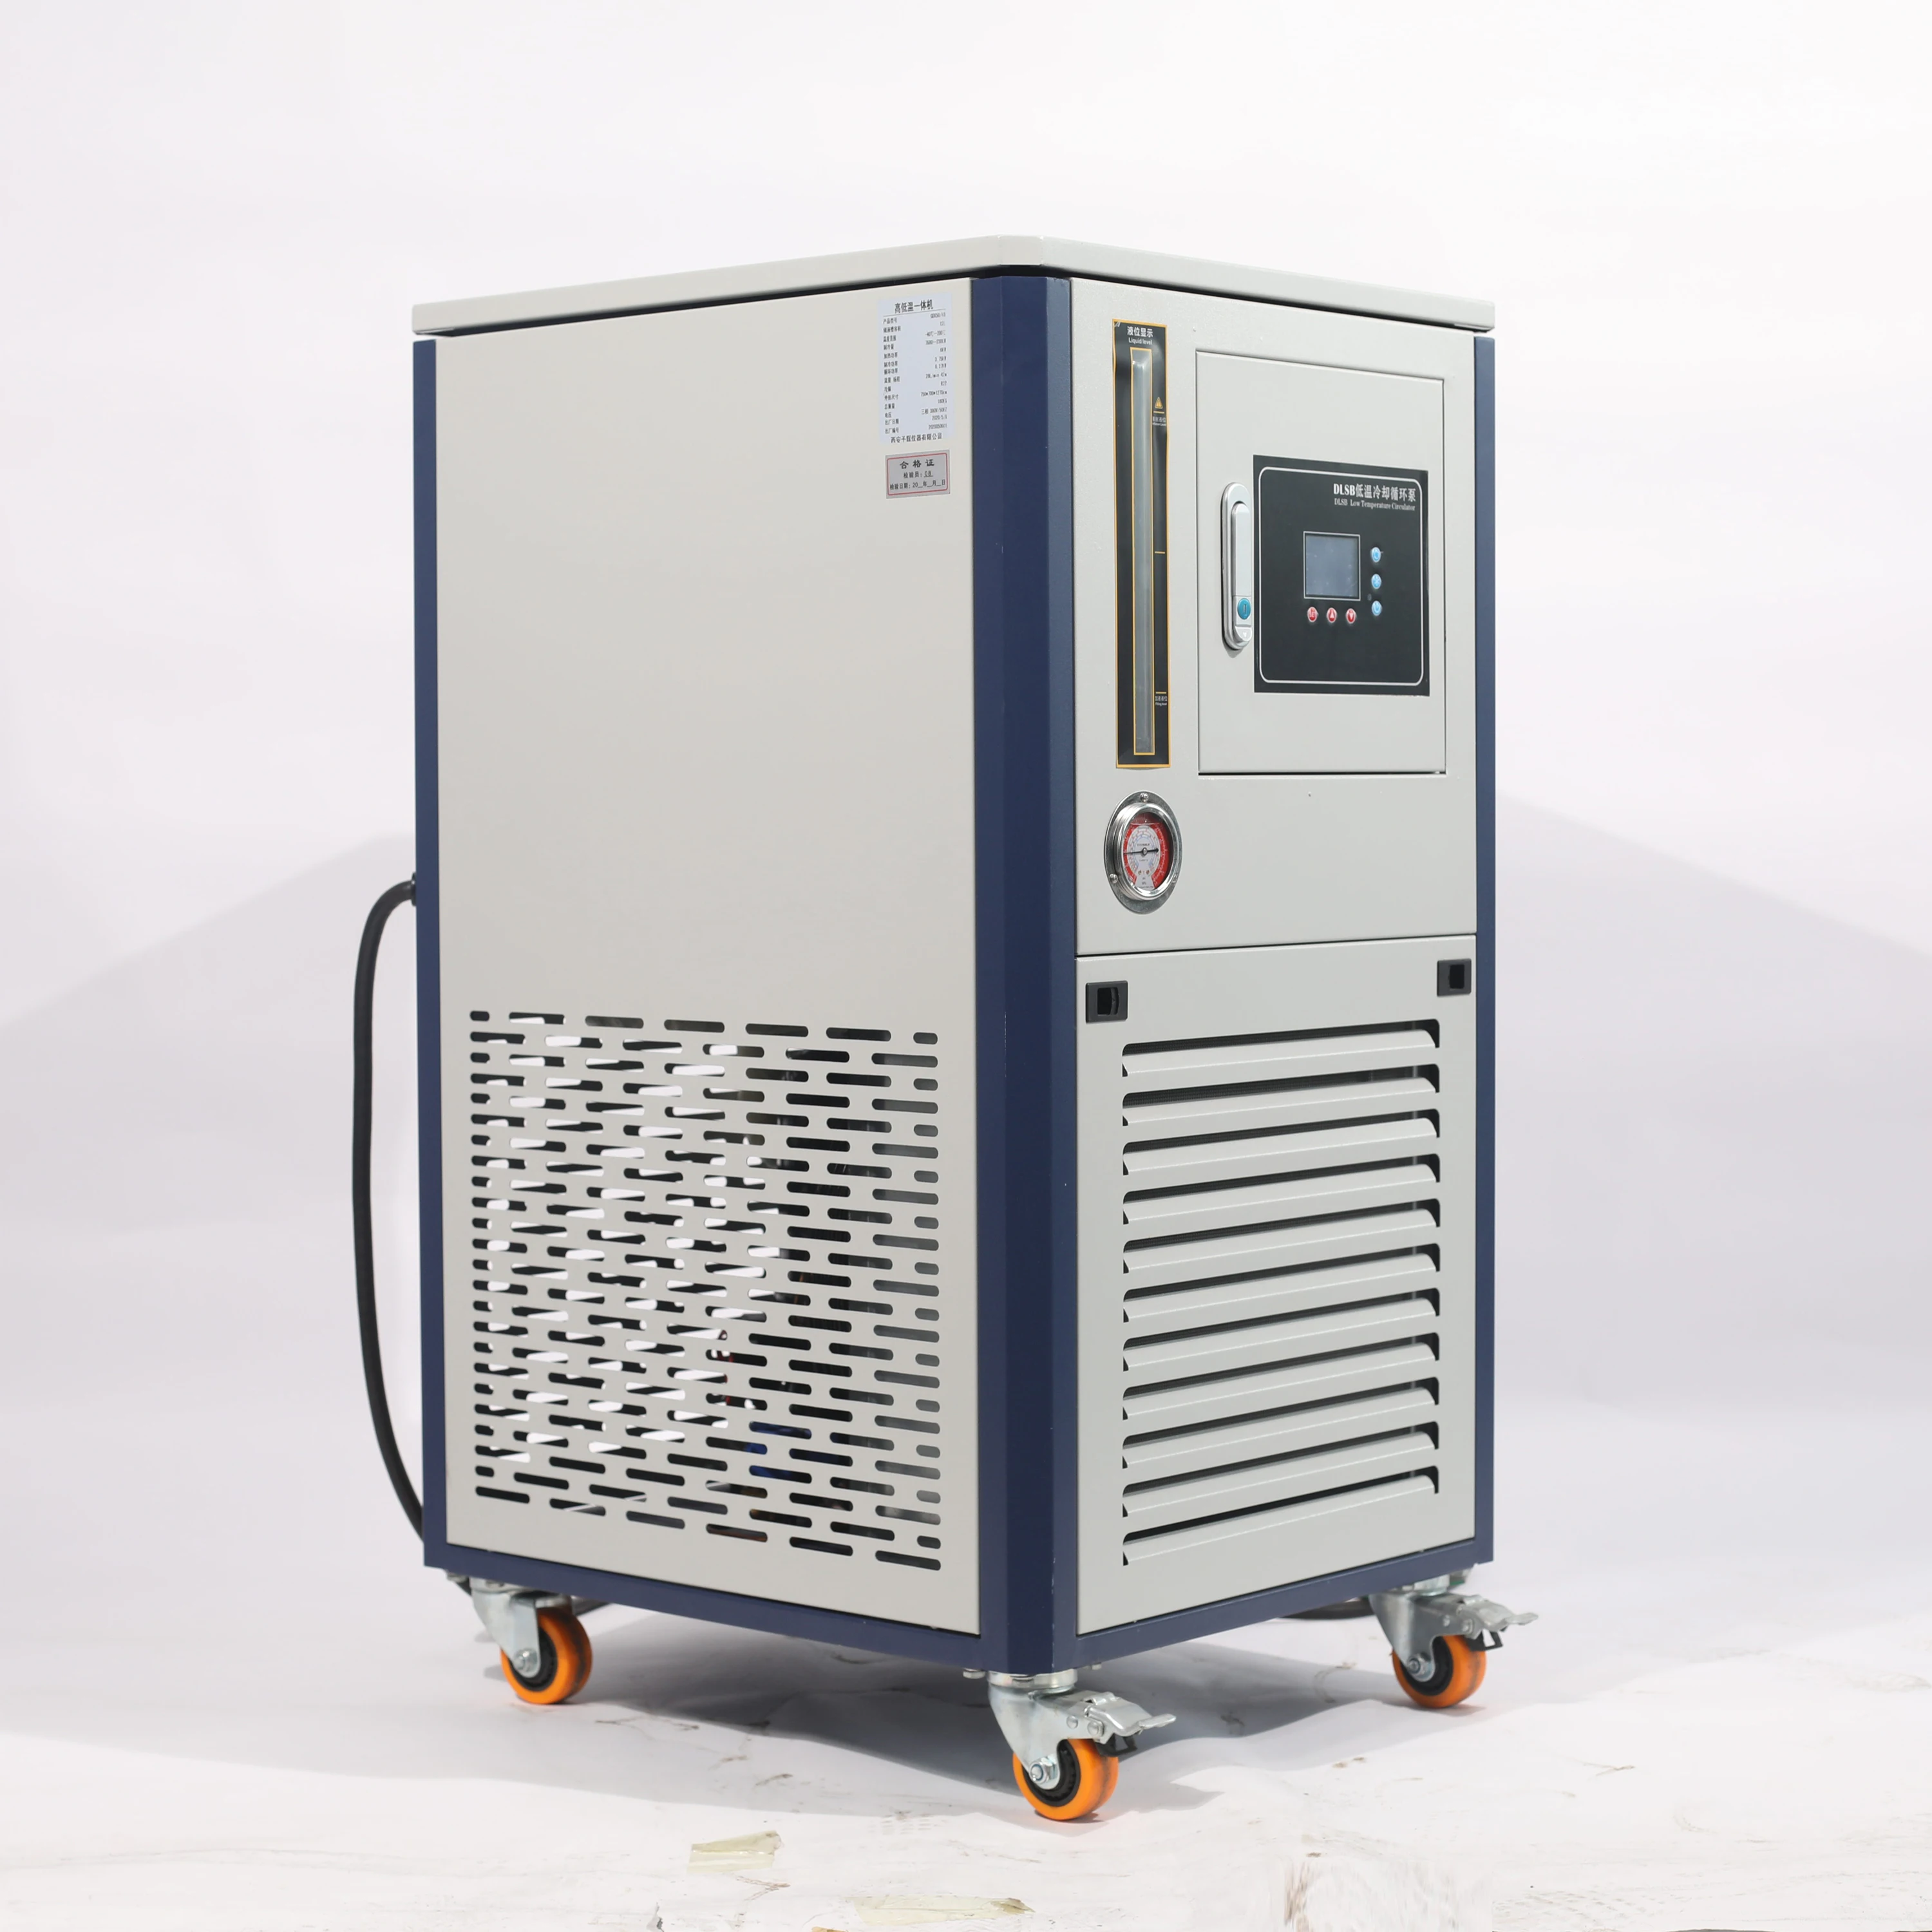 Lab use -80 degree recirculating water chillers for rotary evaporator `s condenser